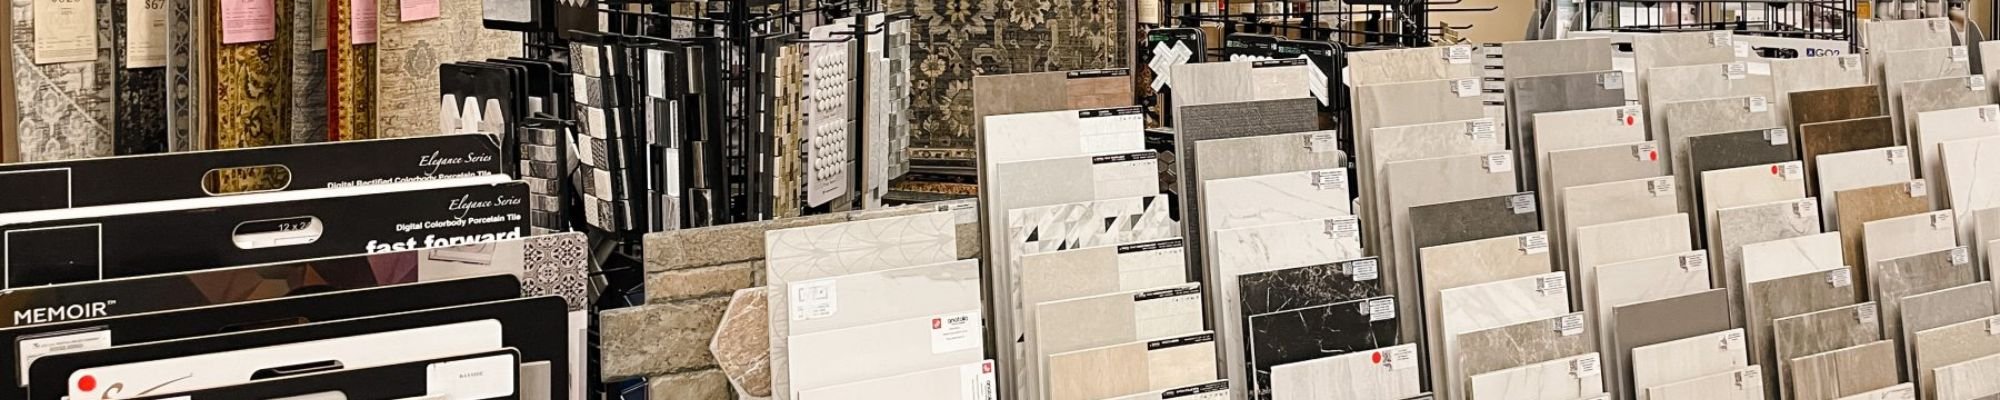 area rug products from Henson's Greater Tennessee Flooring in Knoxville TN